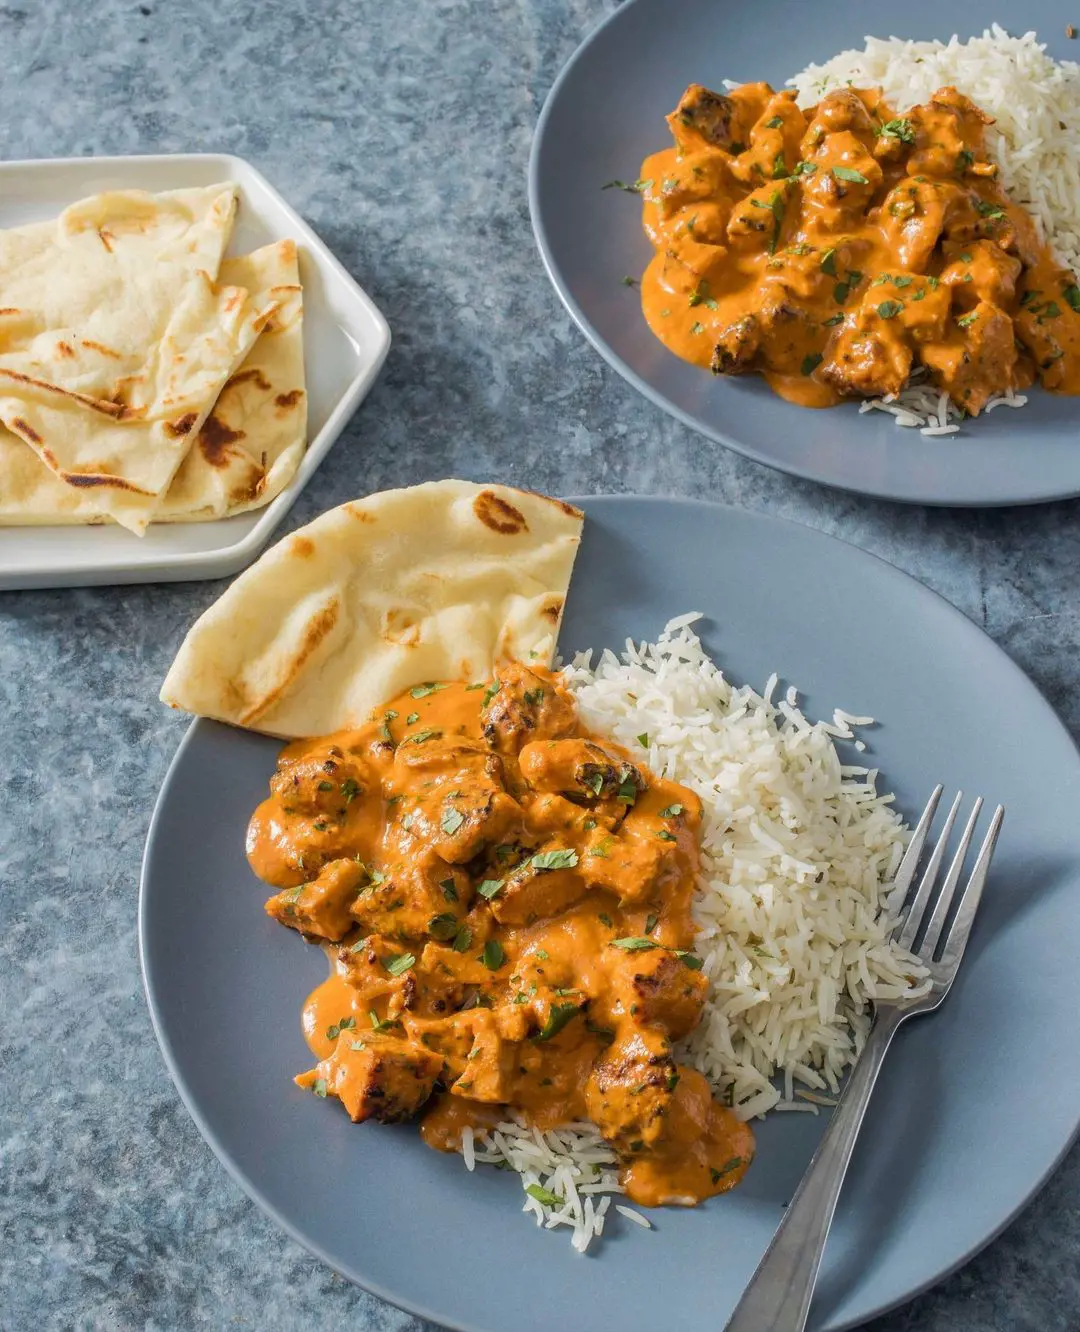 Butter Chicken is often eaten in Northern parts of India with white rice and naan bread